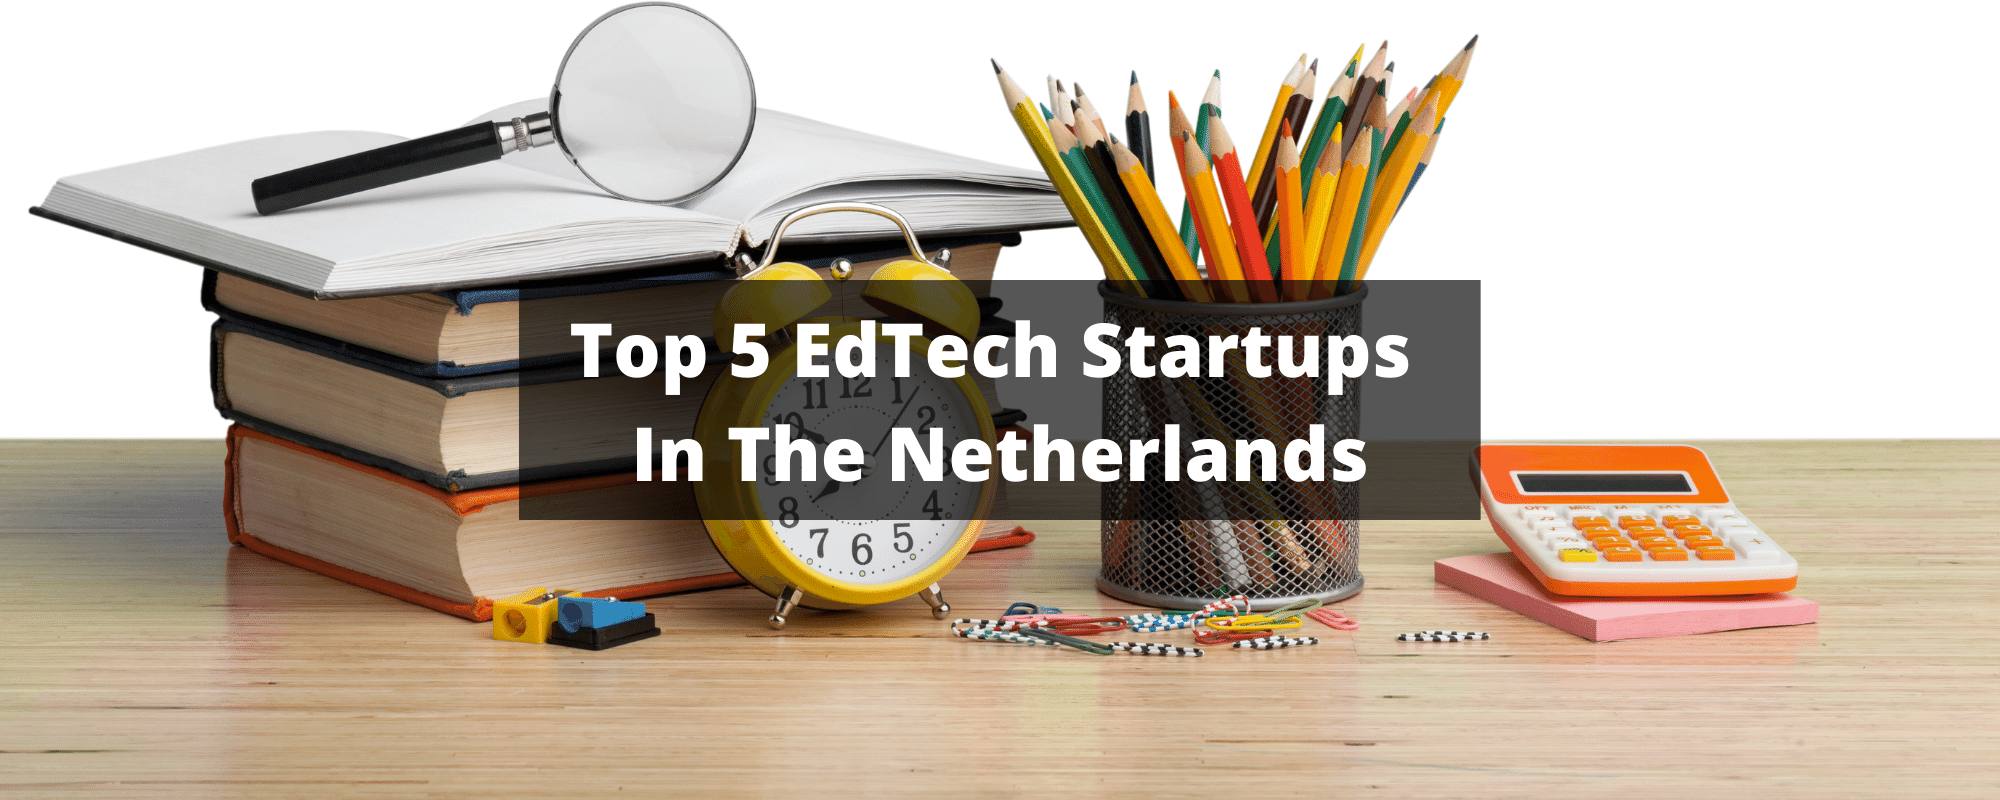 edtech startups in the netherlands